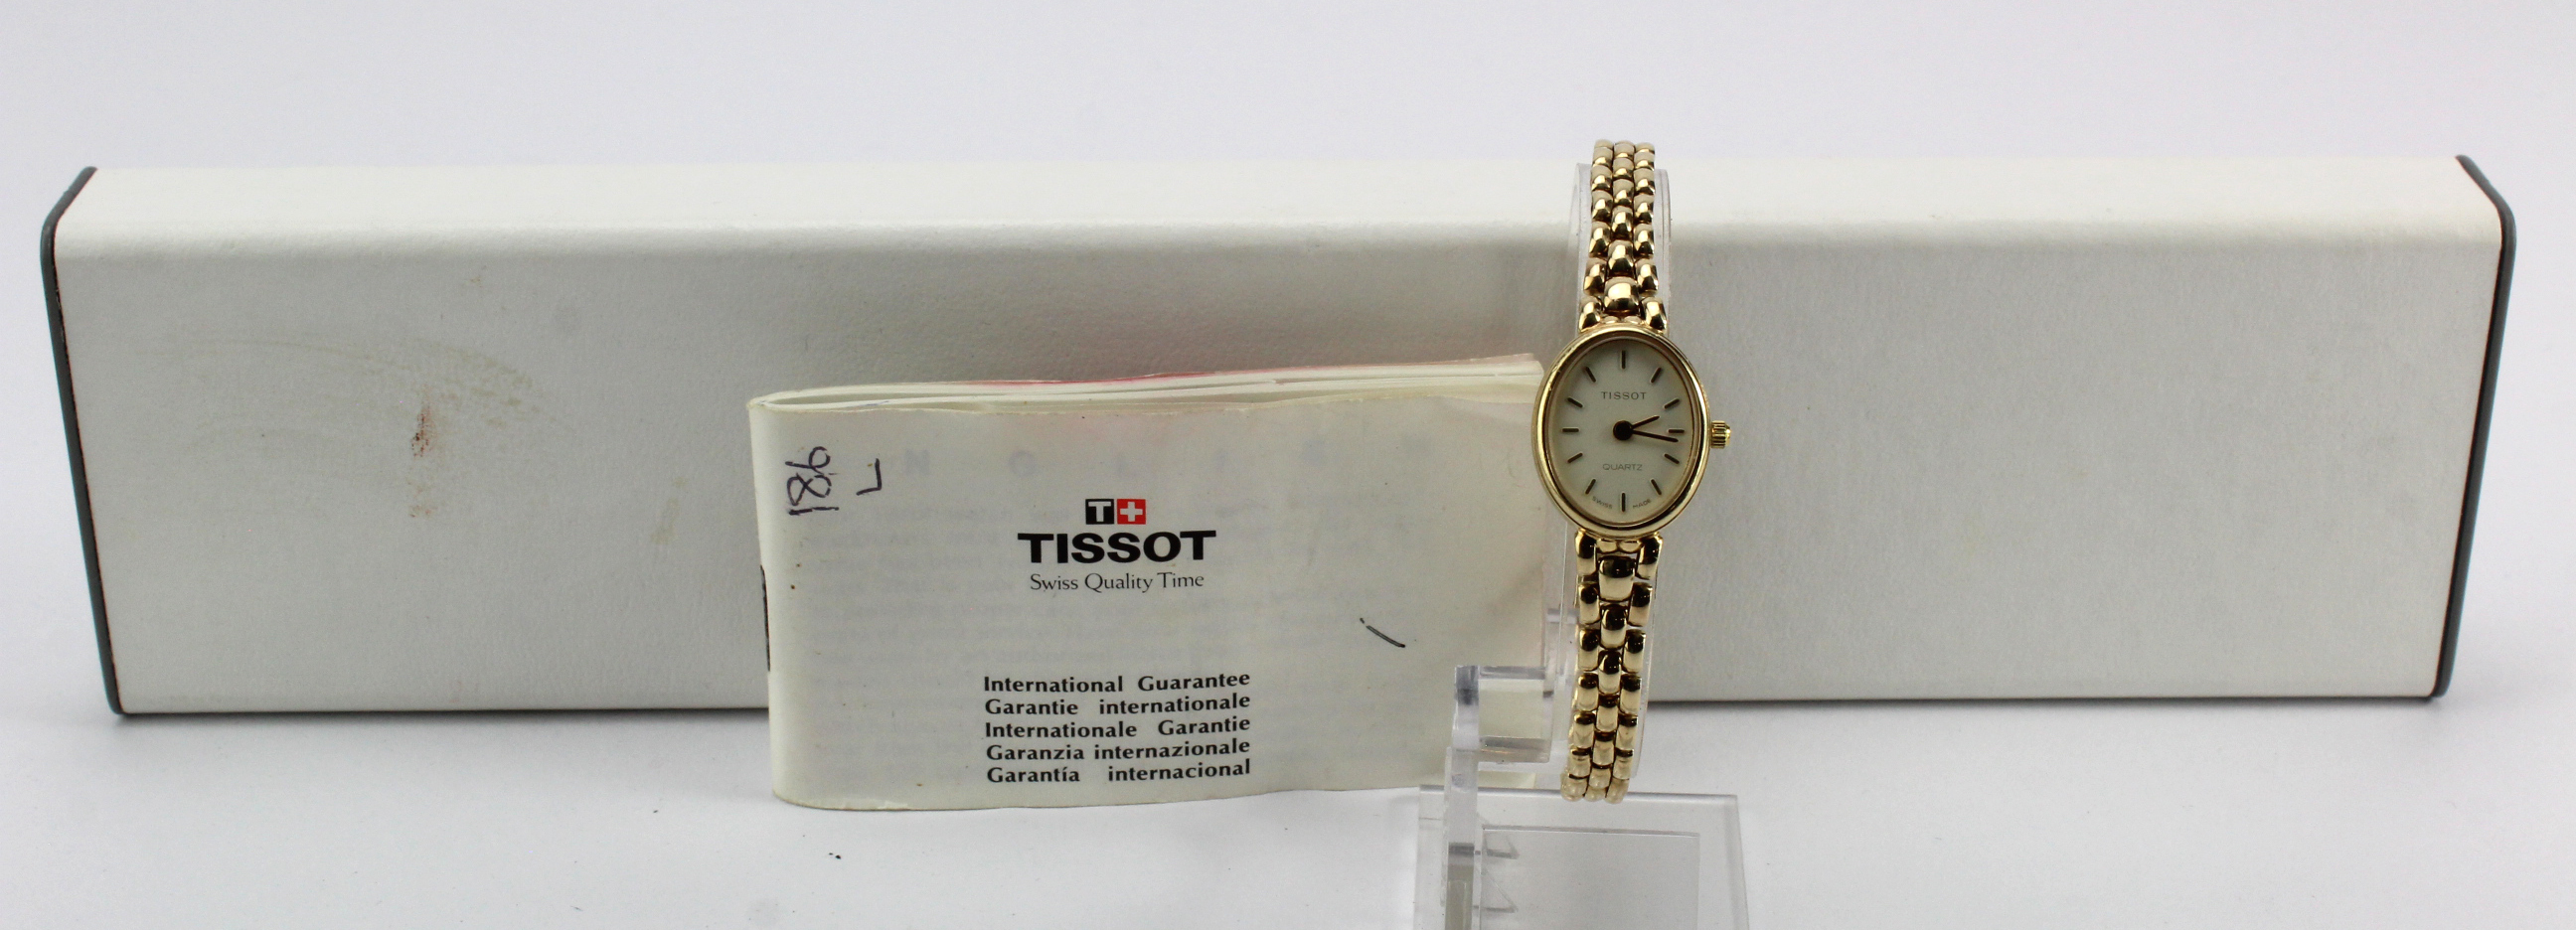 Ladies 9ct cased Tissot quartz wristwatch. On an 9ct bracelet. Total weight 18.1g. Boxed with some